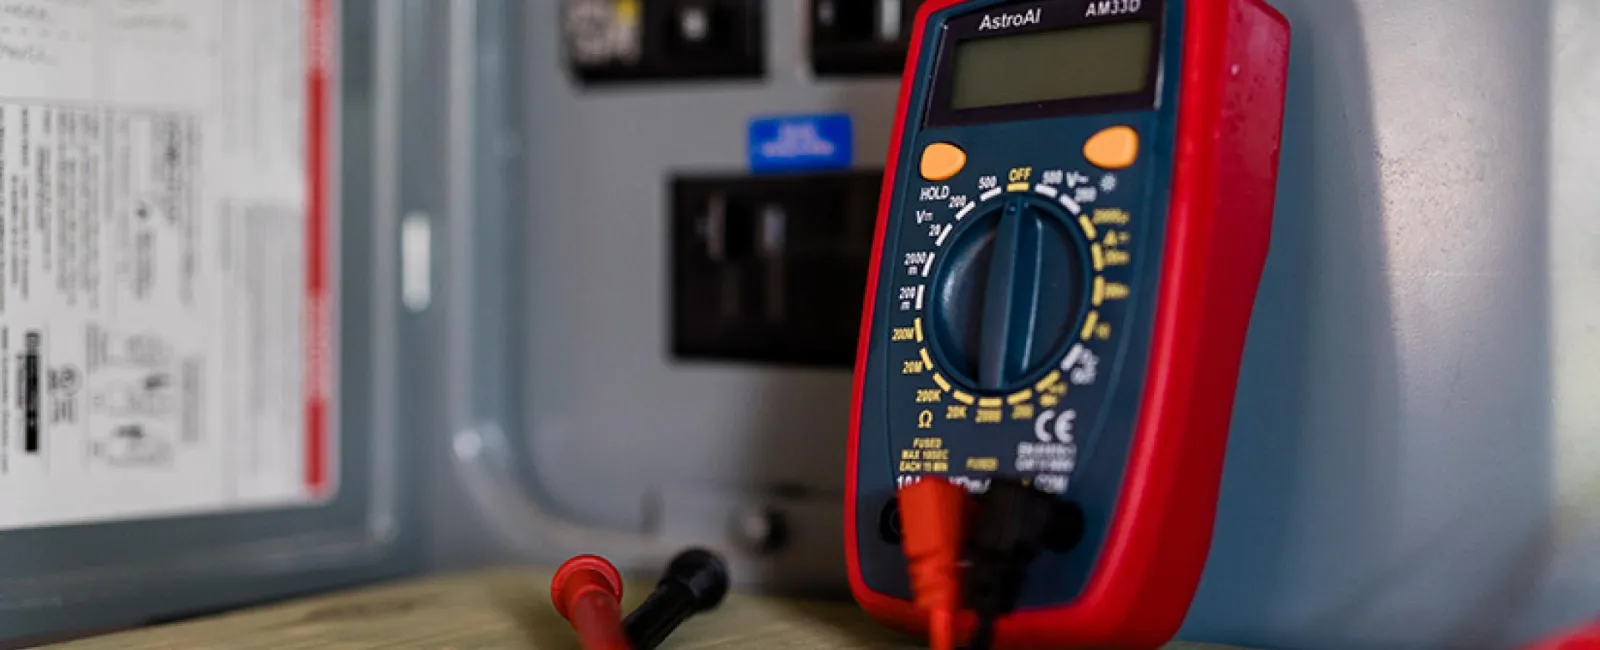 How to Test a Circuit Breaker with a Multimeter.